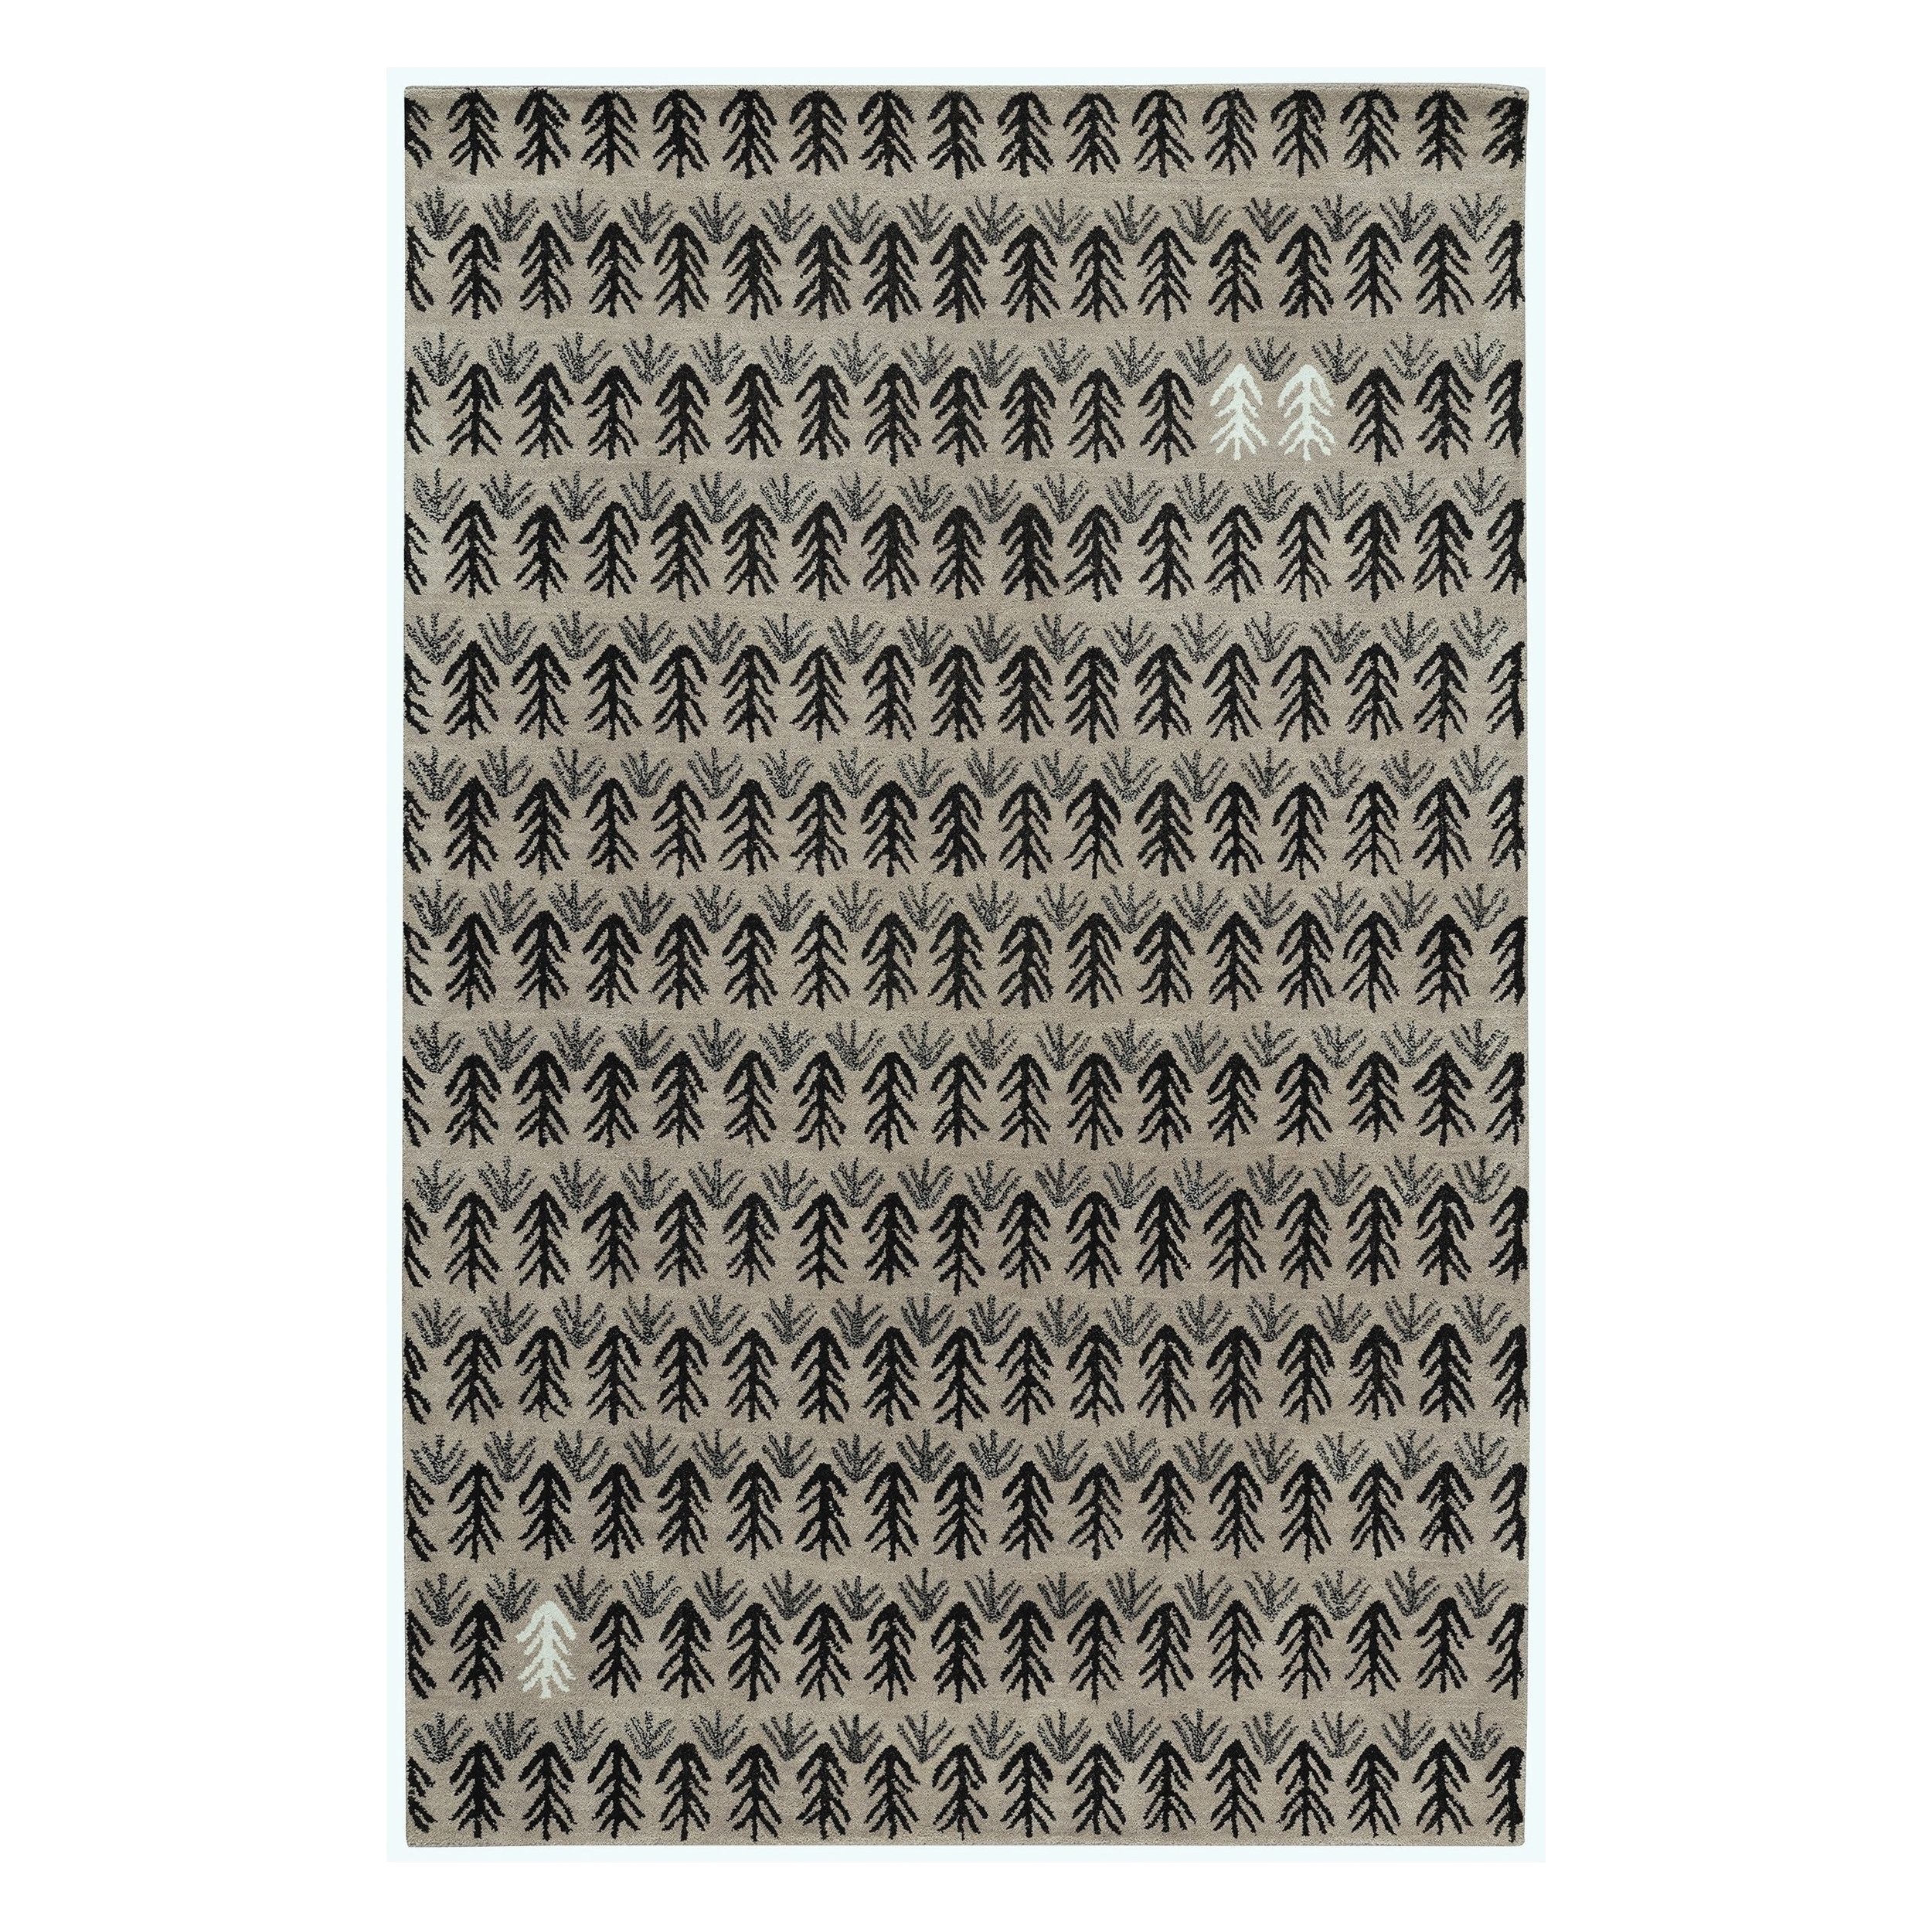 capel genevieve gorder twigs black hand tufted rectangular rug 8 x 10 black size 8 x 10 synthetic abstract